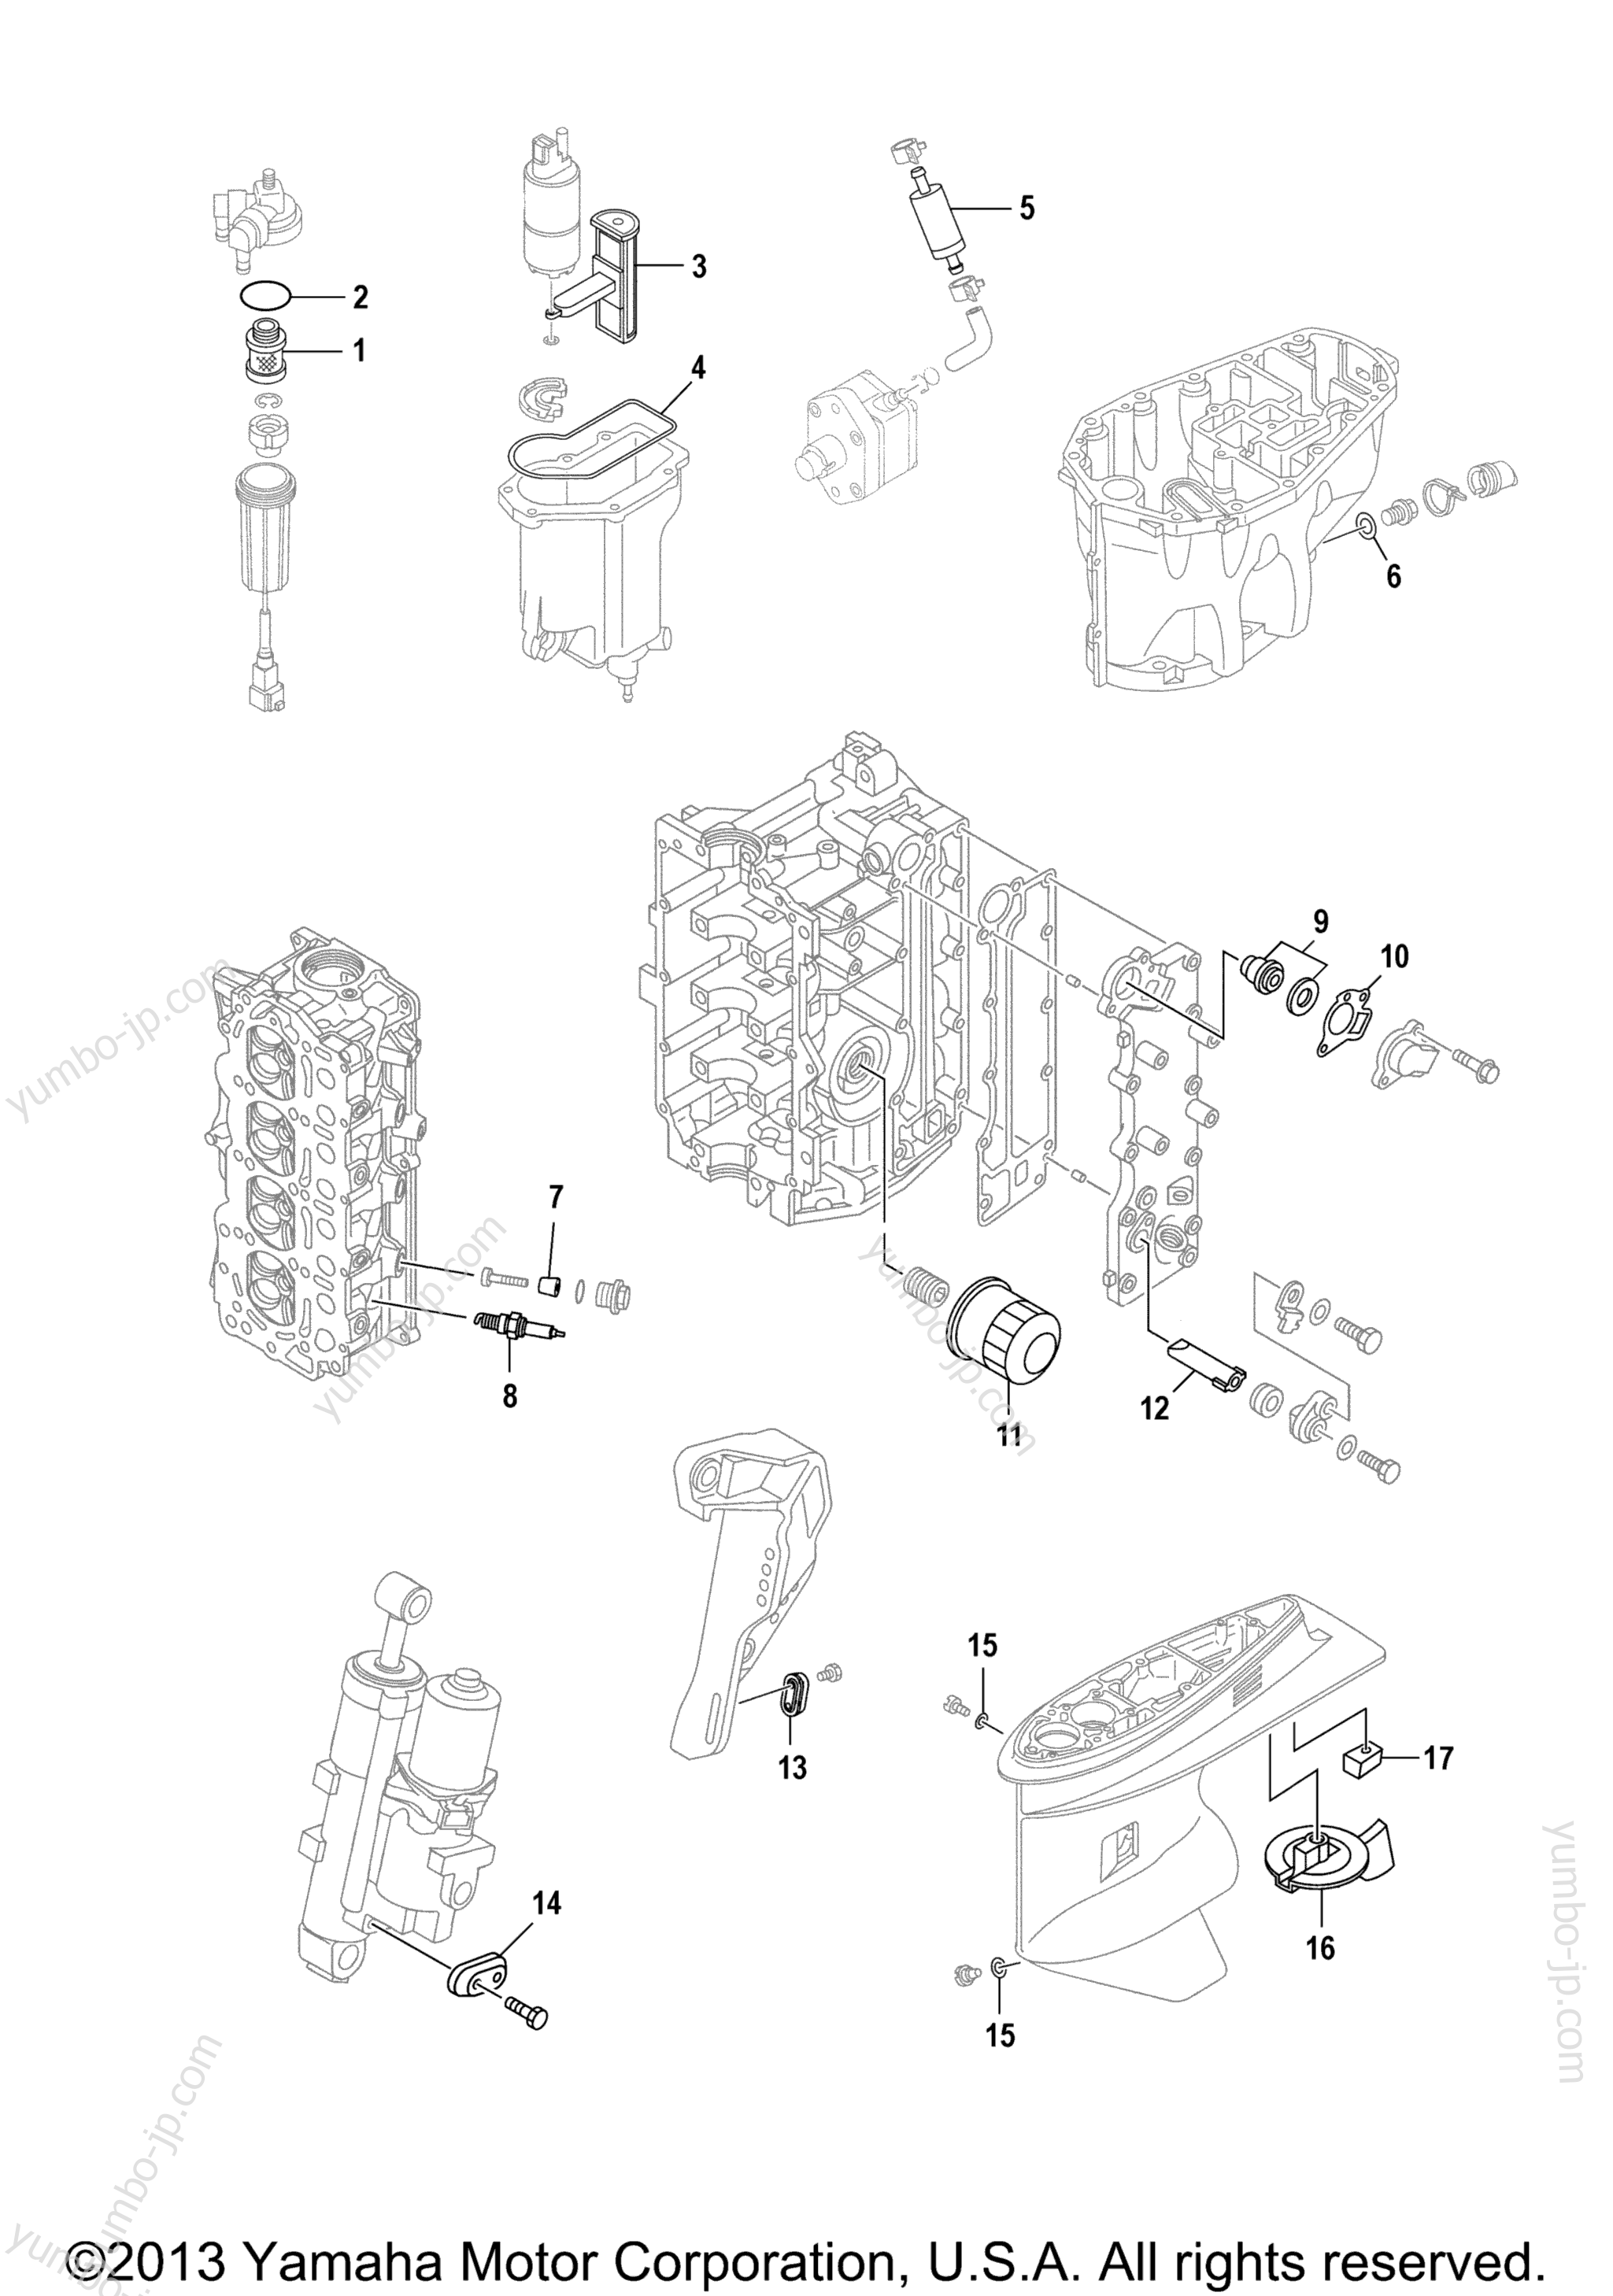 Scheduled Service Parts for outboards YAMAHA F50LHA_011 (0112) 2006 year